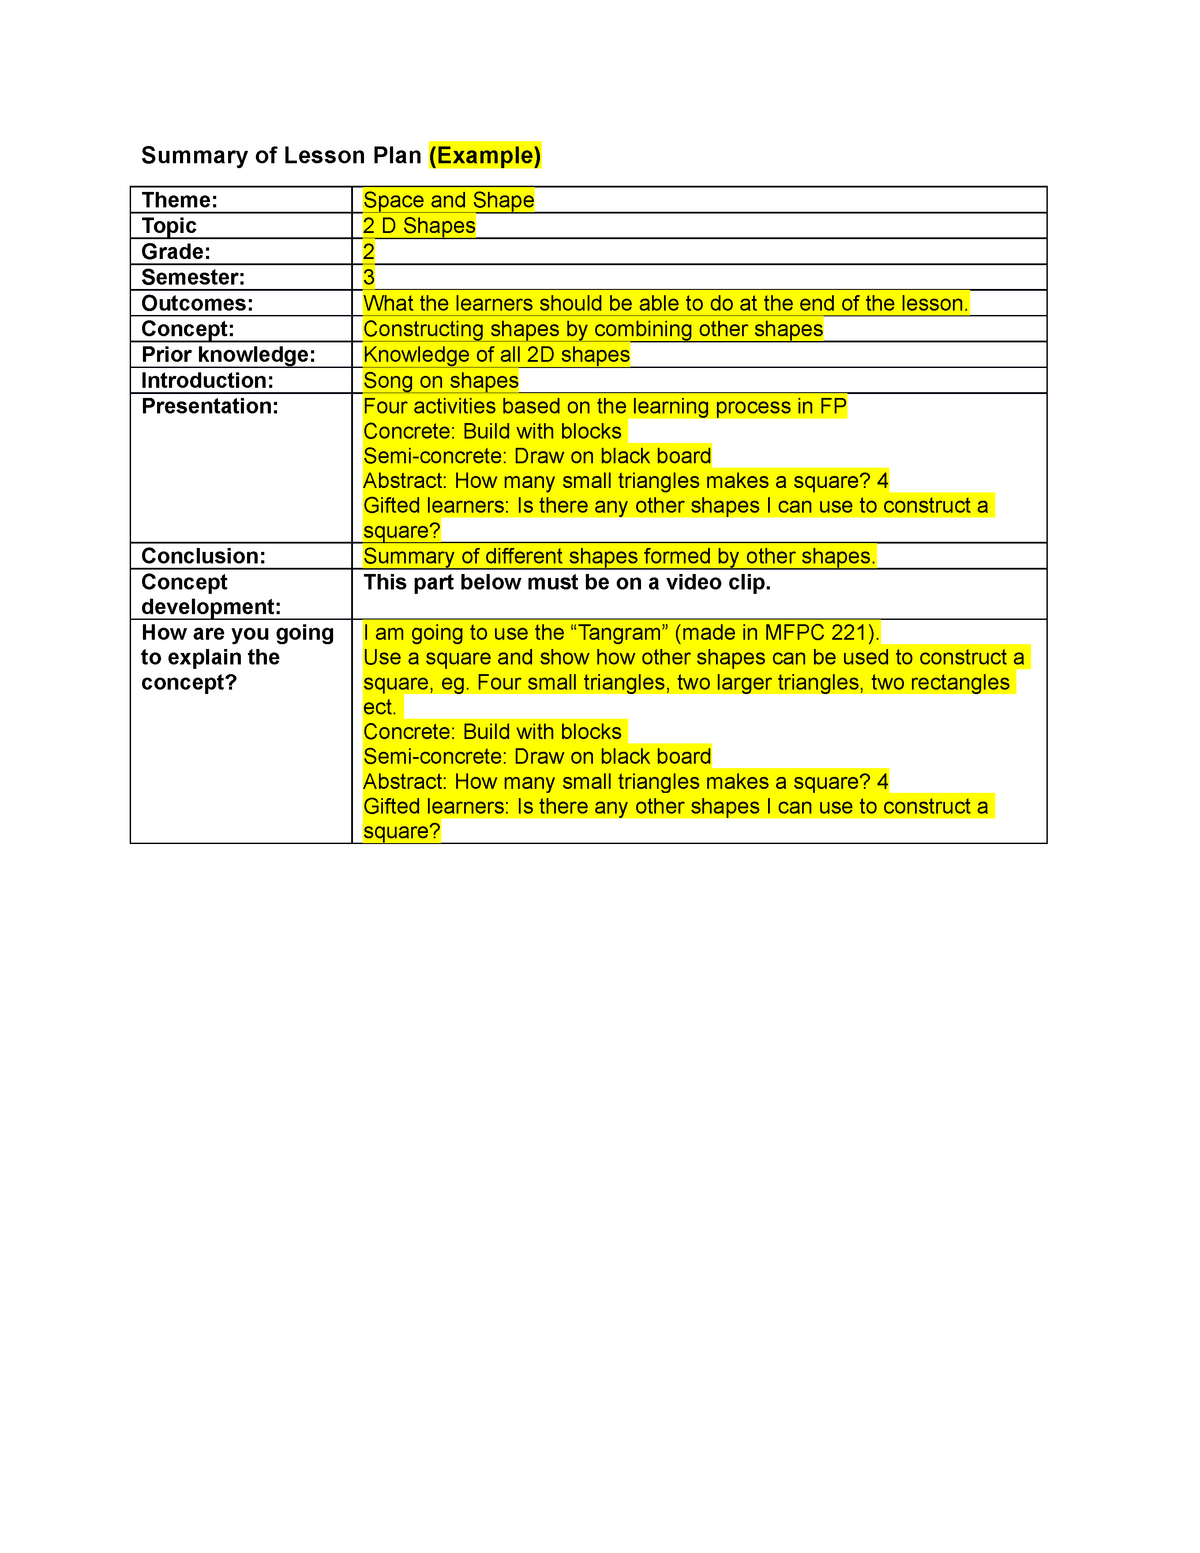 how to write a summary lesson plan